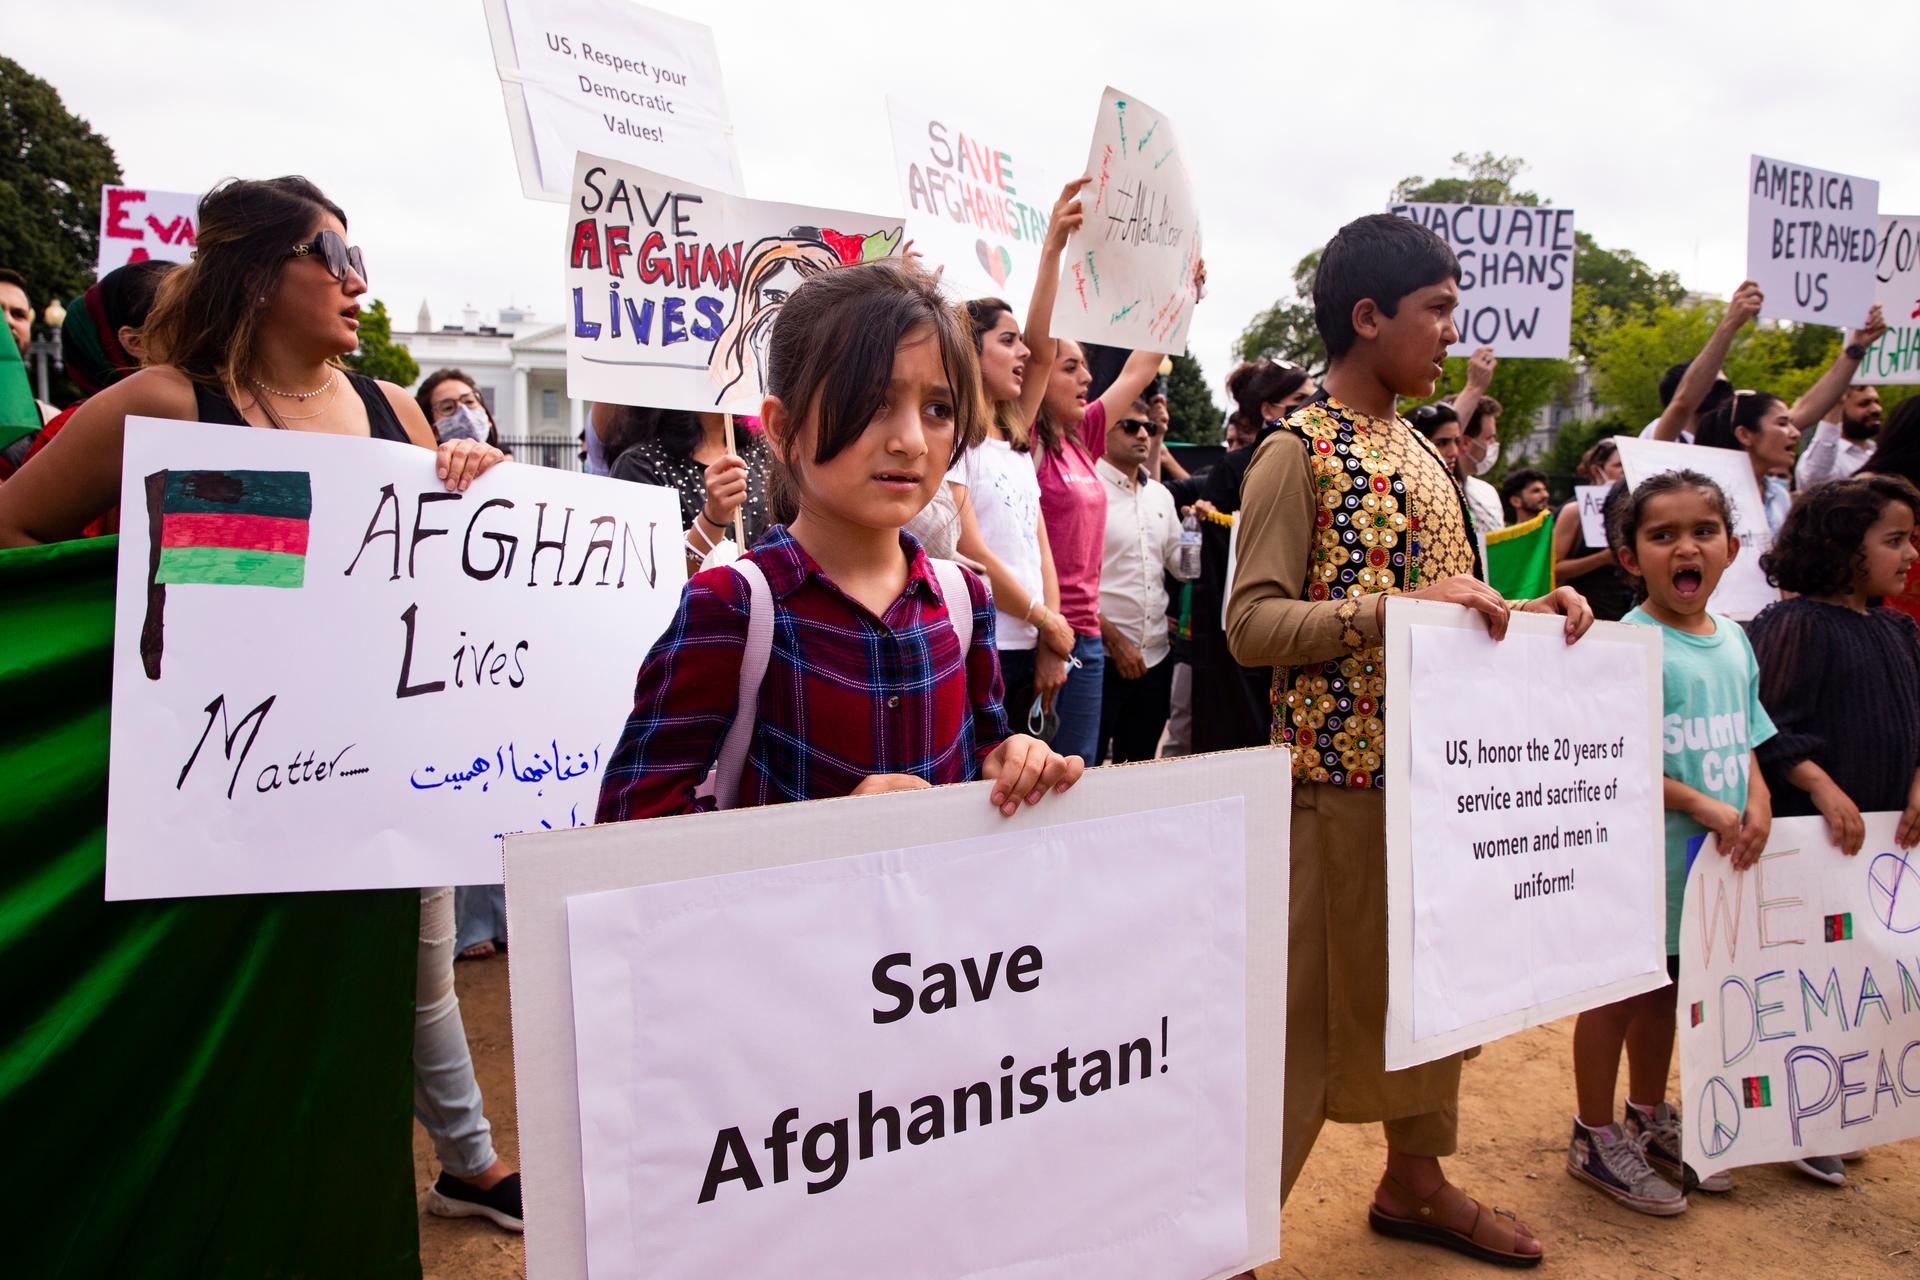 Women holding signs saying "save Afghan lives" and "Afghan Lives Matter" at a protest, with the White House in the background